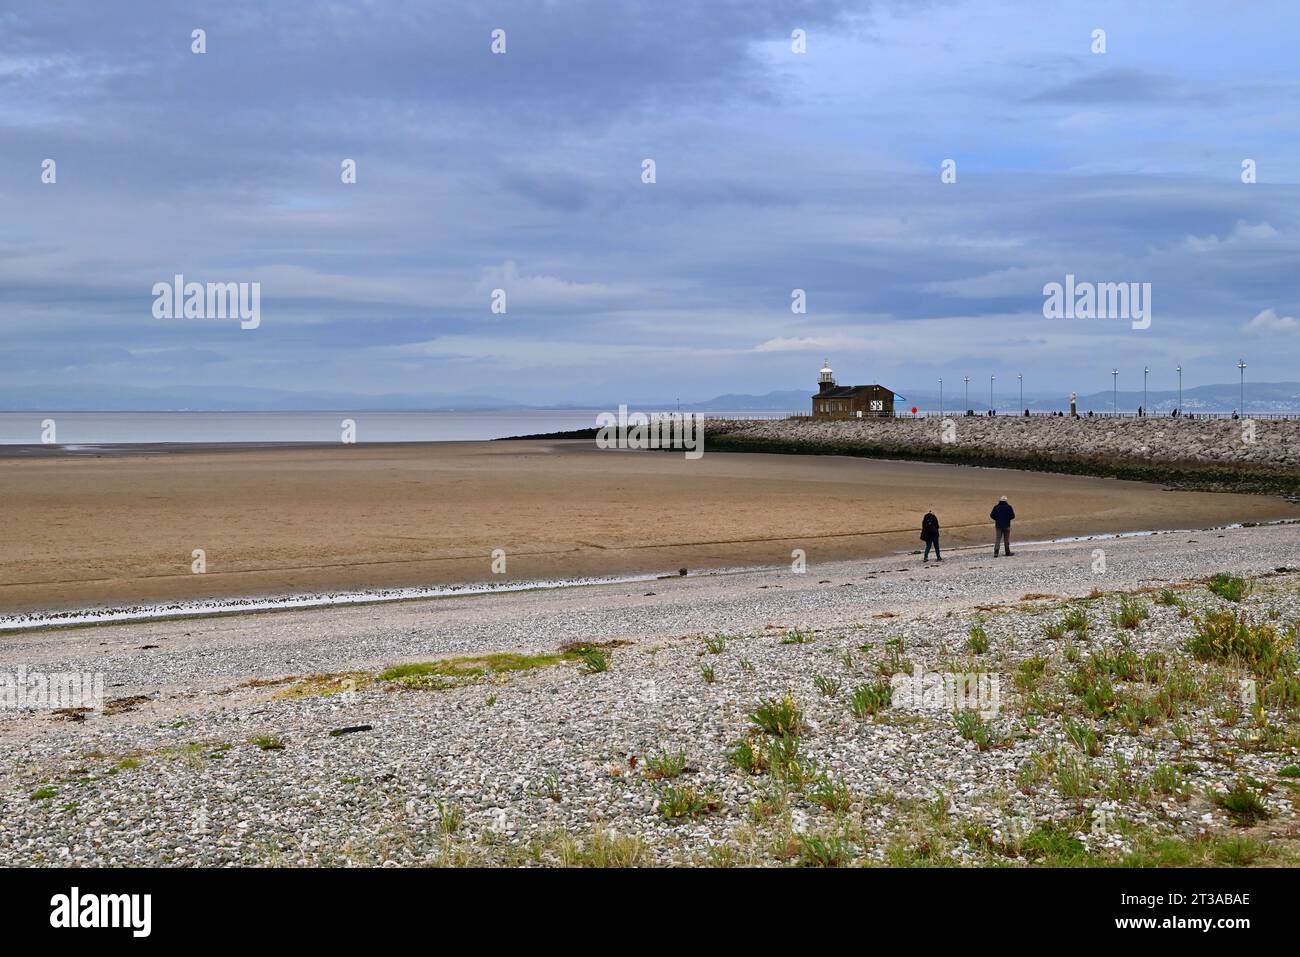 Around the UK - The Stone Jetty, Morecambe Bay at low tide. Stock Photo